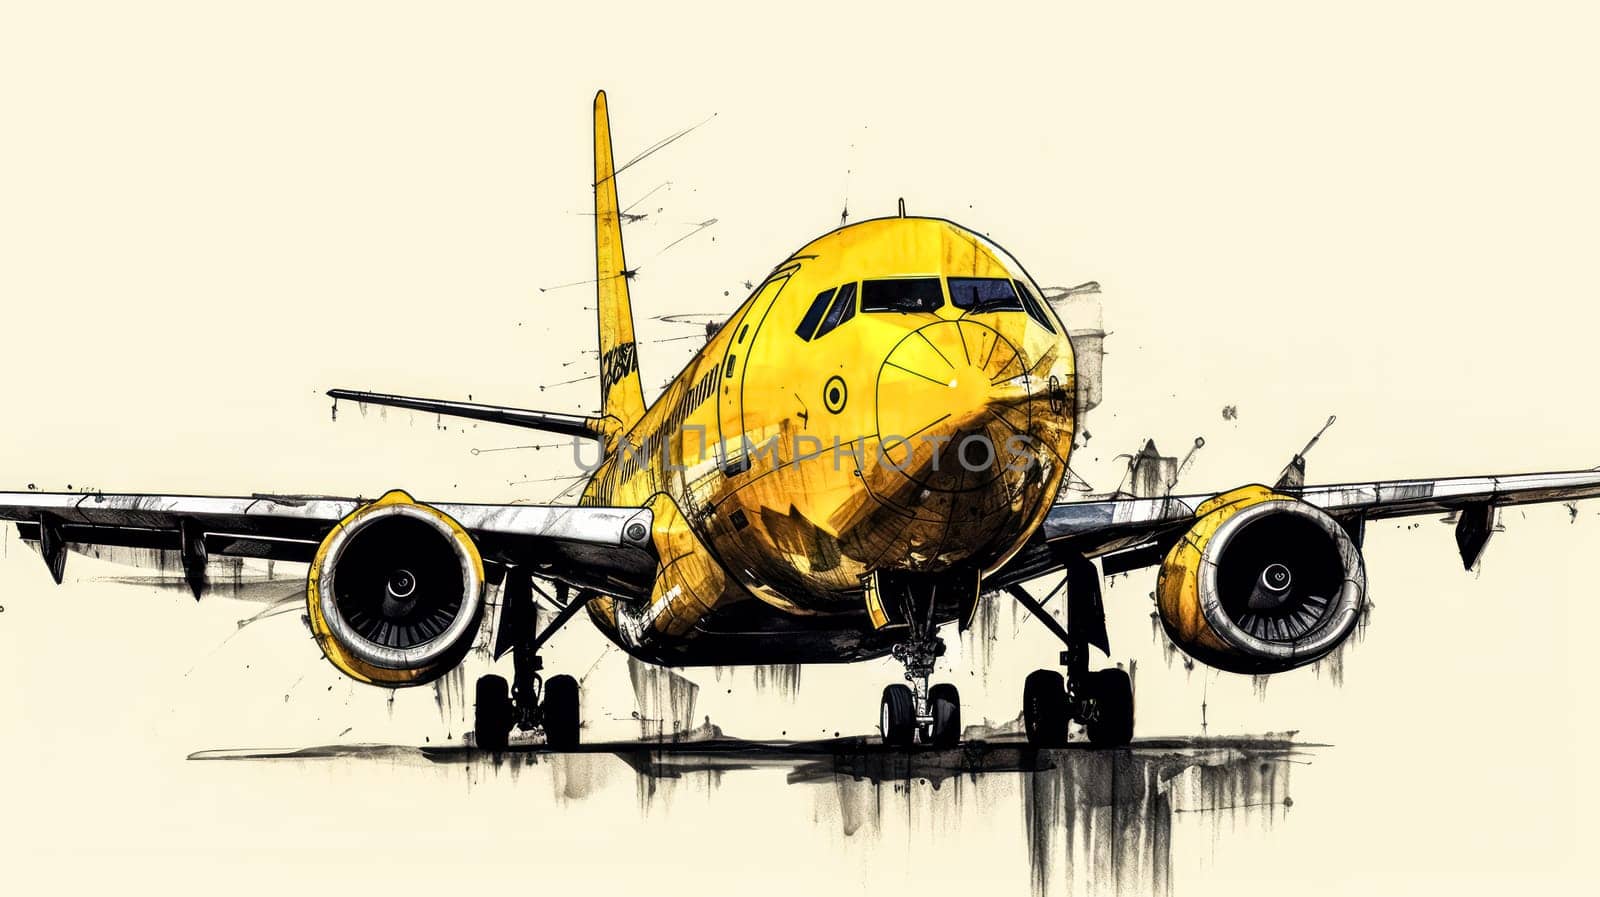 A charming watercolor sketch of an airplane with yellow gray lines by Alla_Morozova93